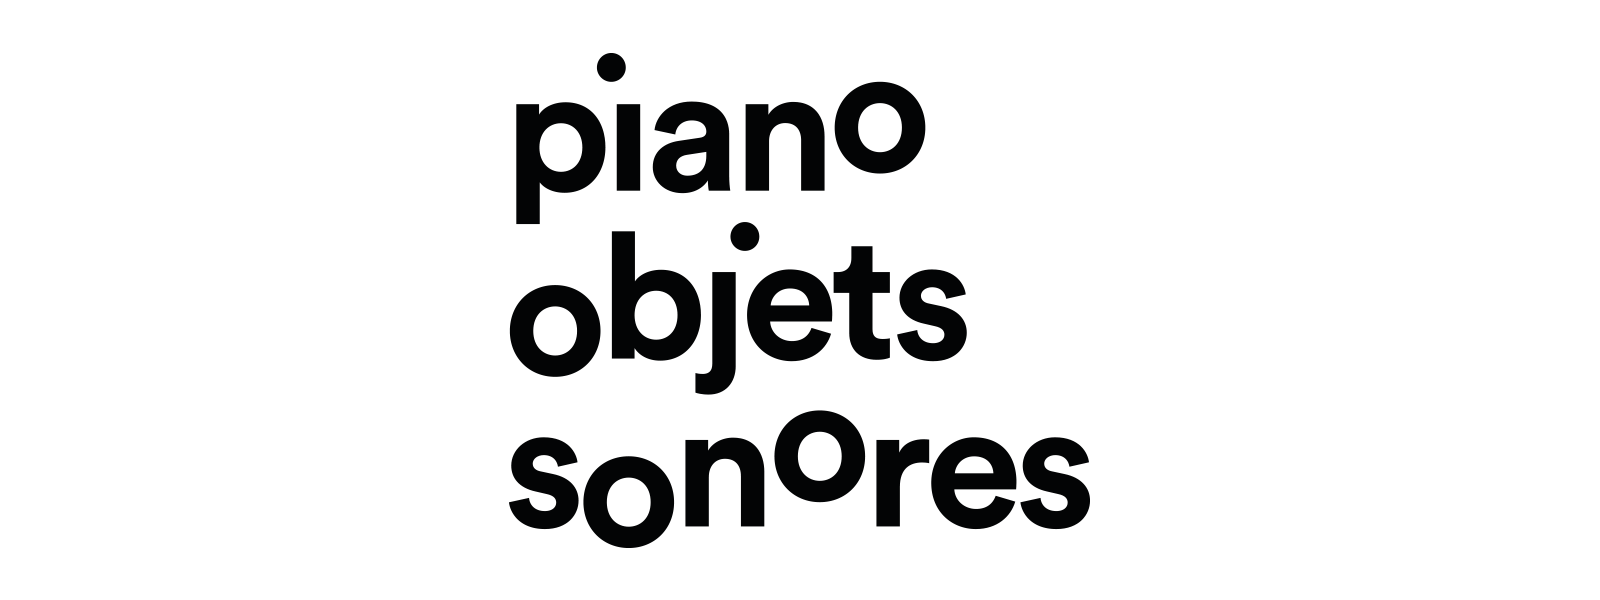 Piano objets sonores logo